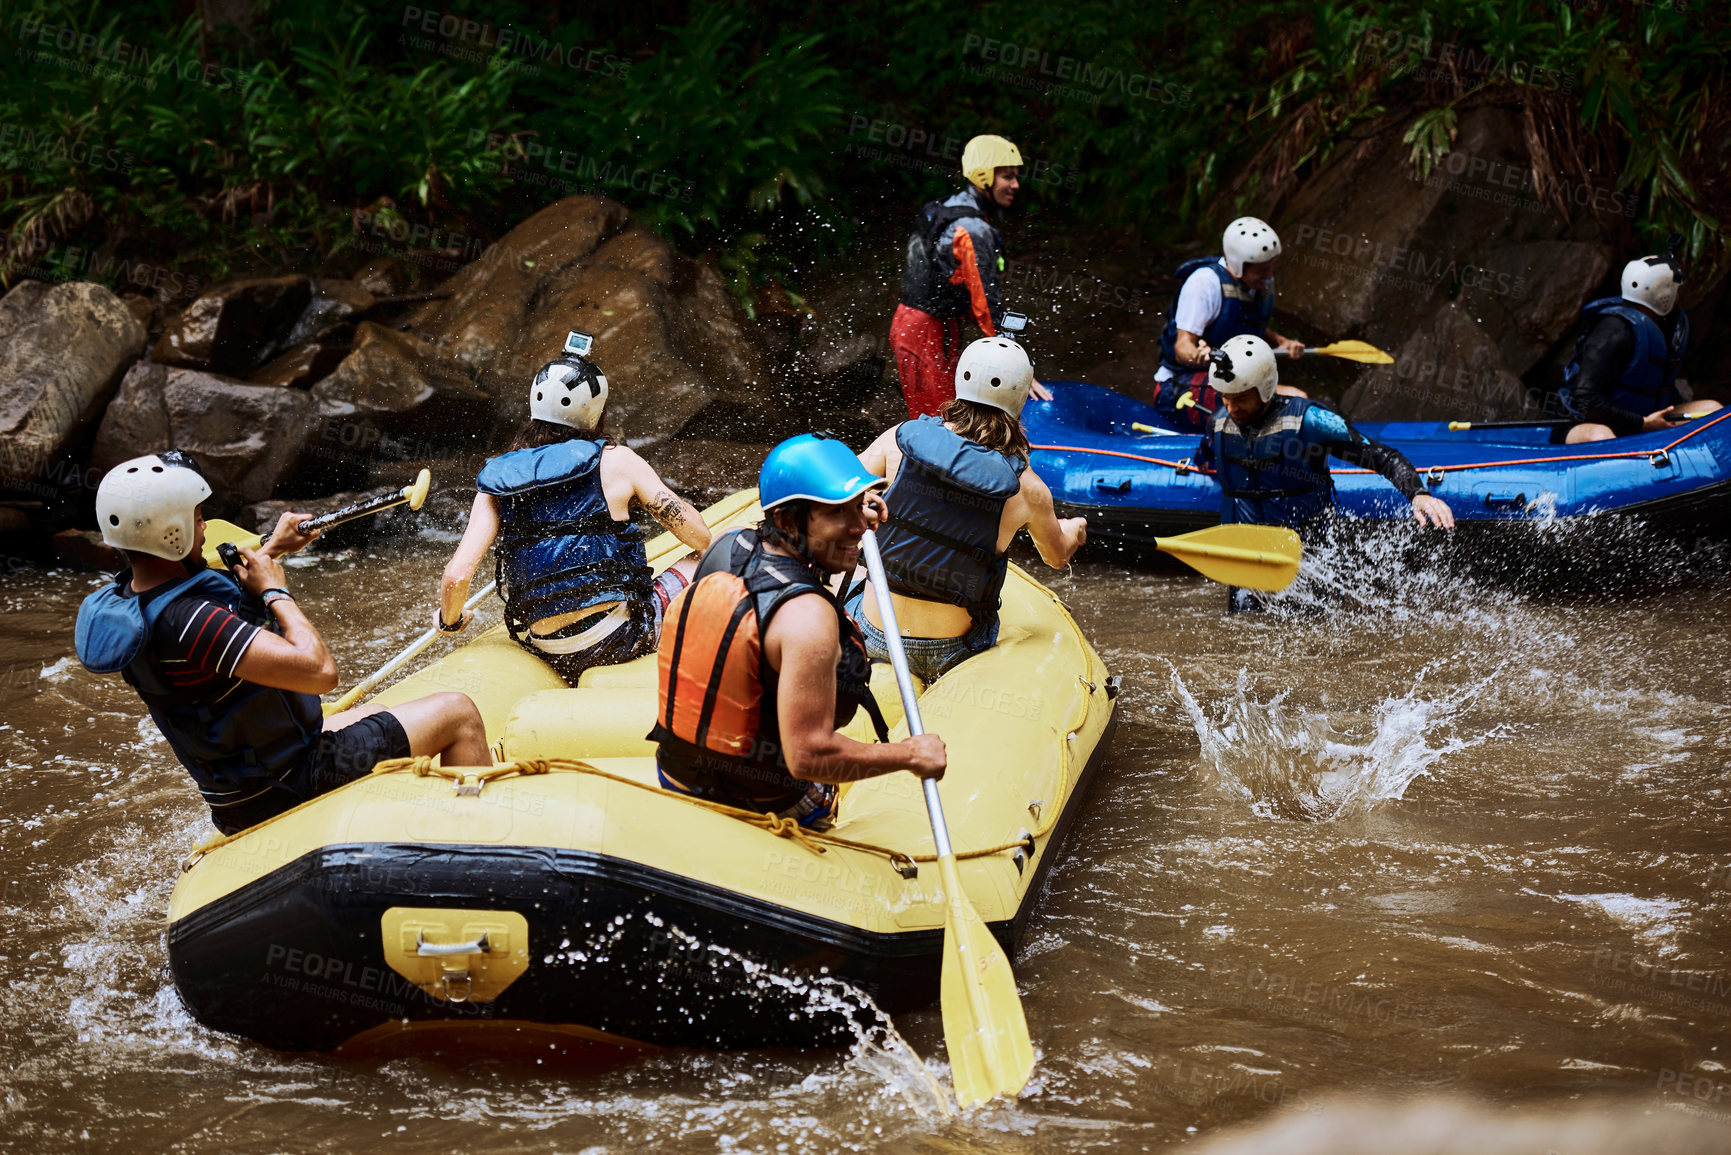 Buy stock photo Shot of a group of cheerful young people in a rubber boat paddling on a river outside during the day